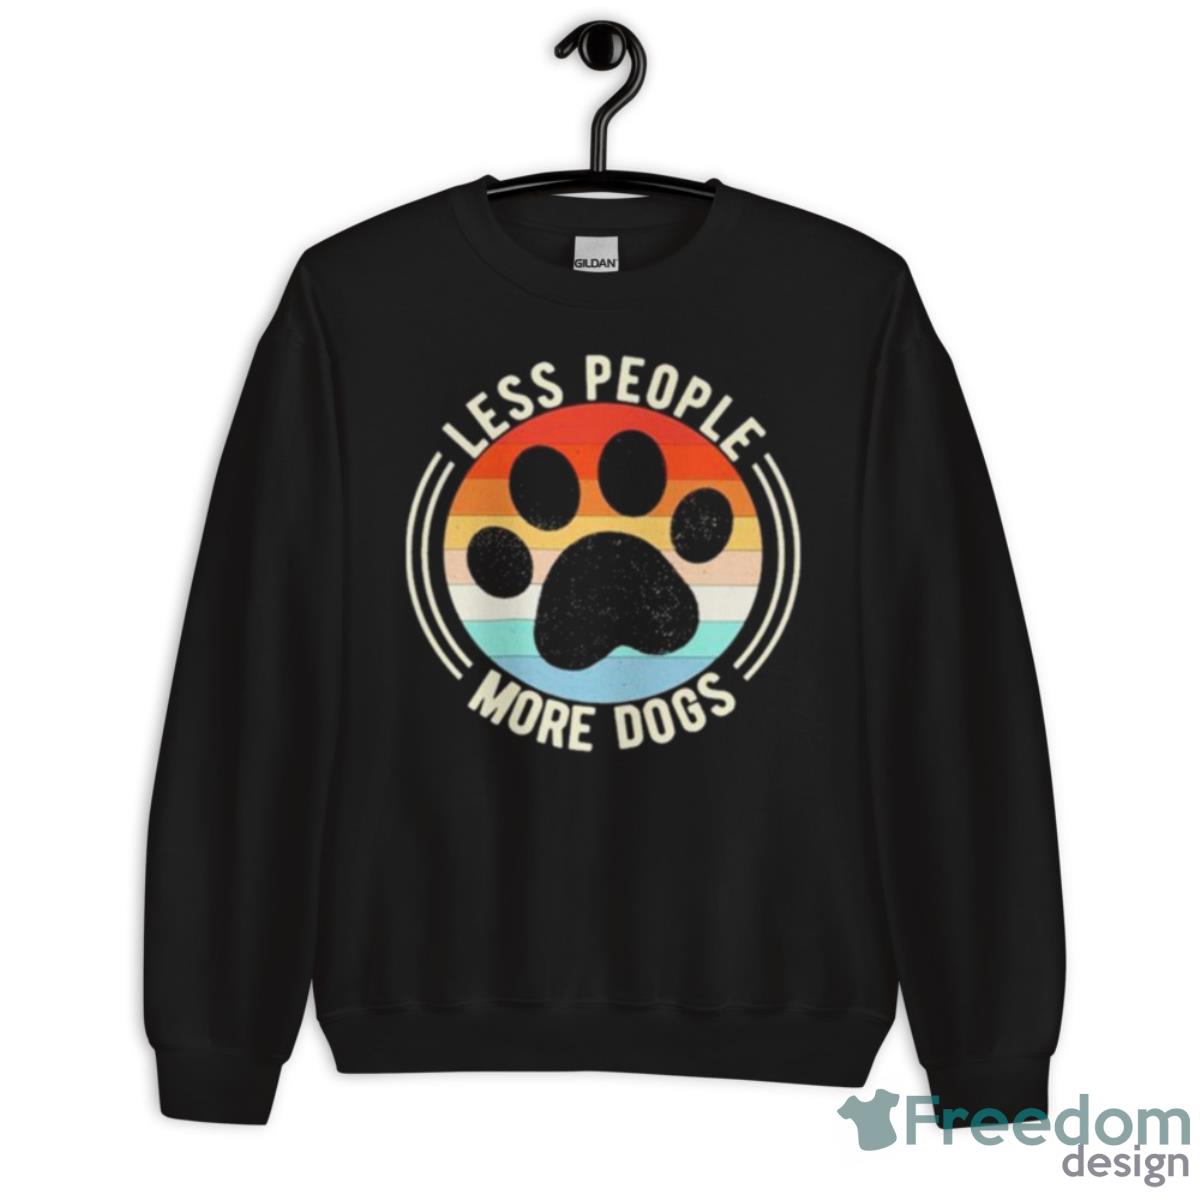 Less People More Dogs Feet Vintage Shirt